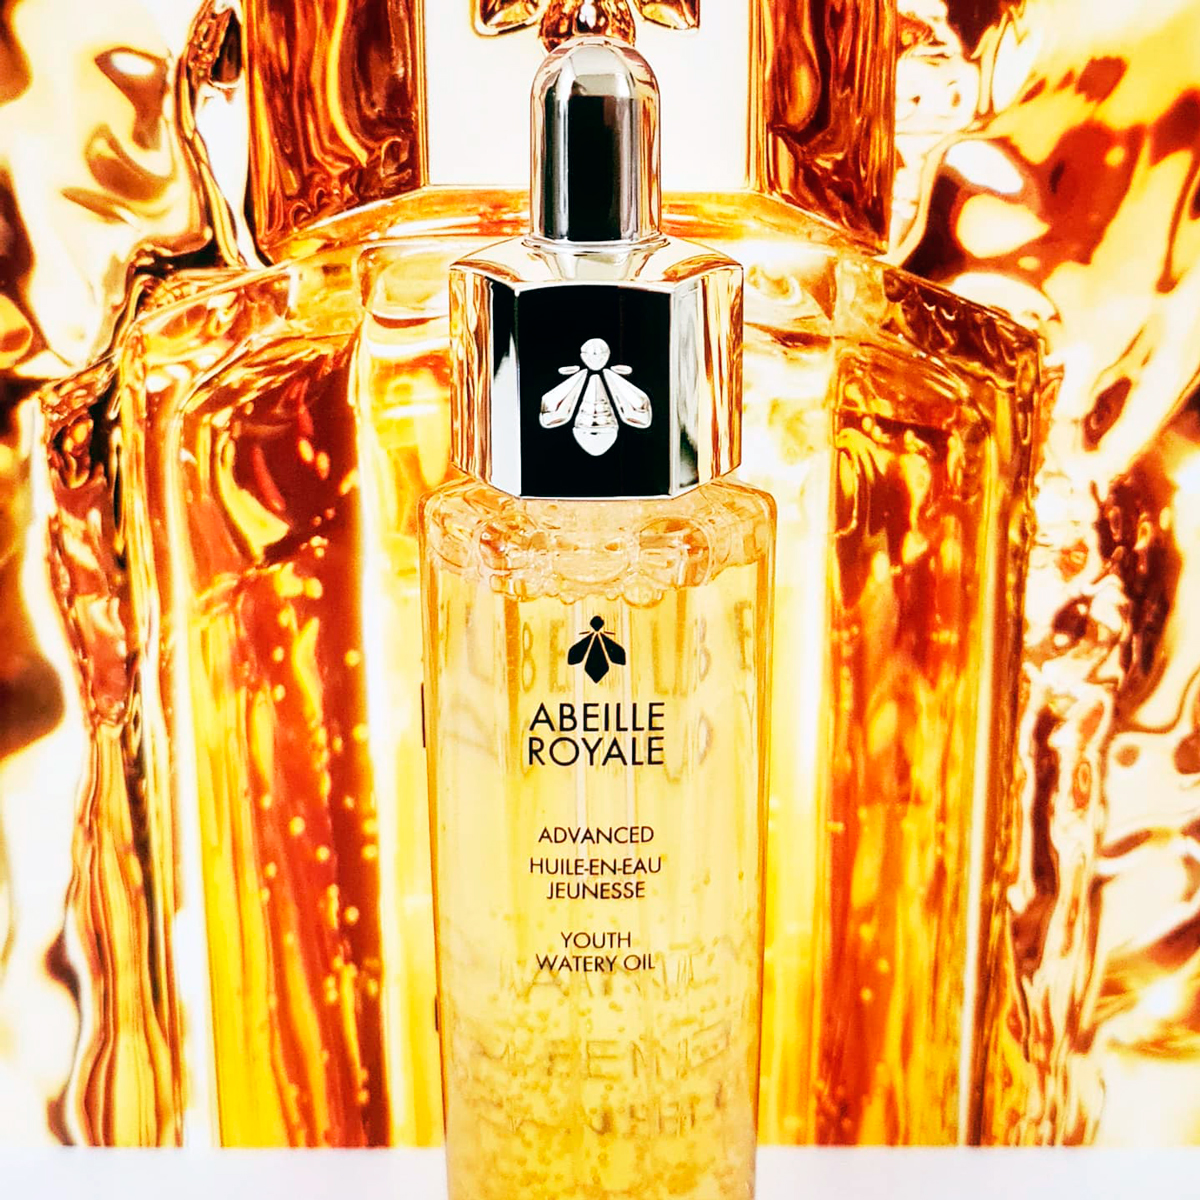 Abeille Royale Watery Oil